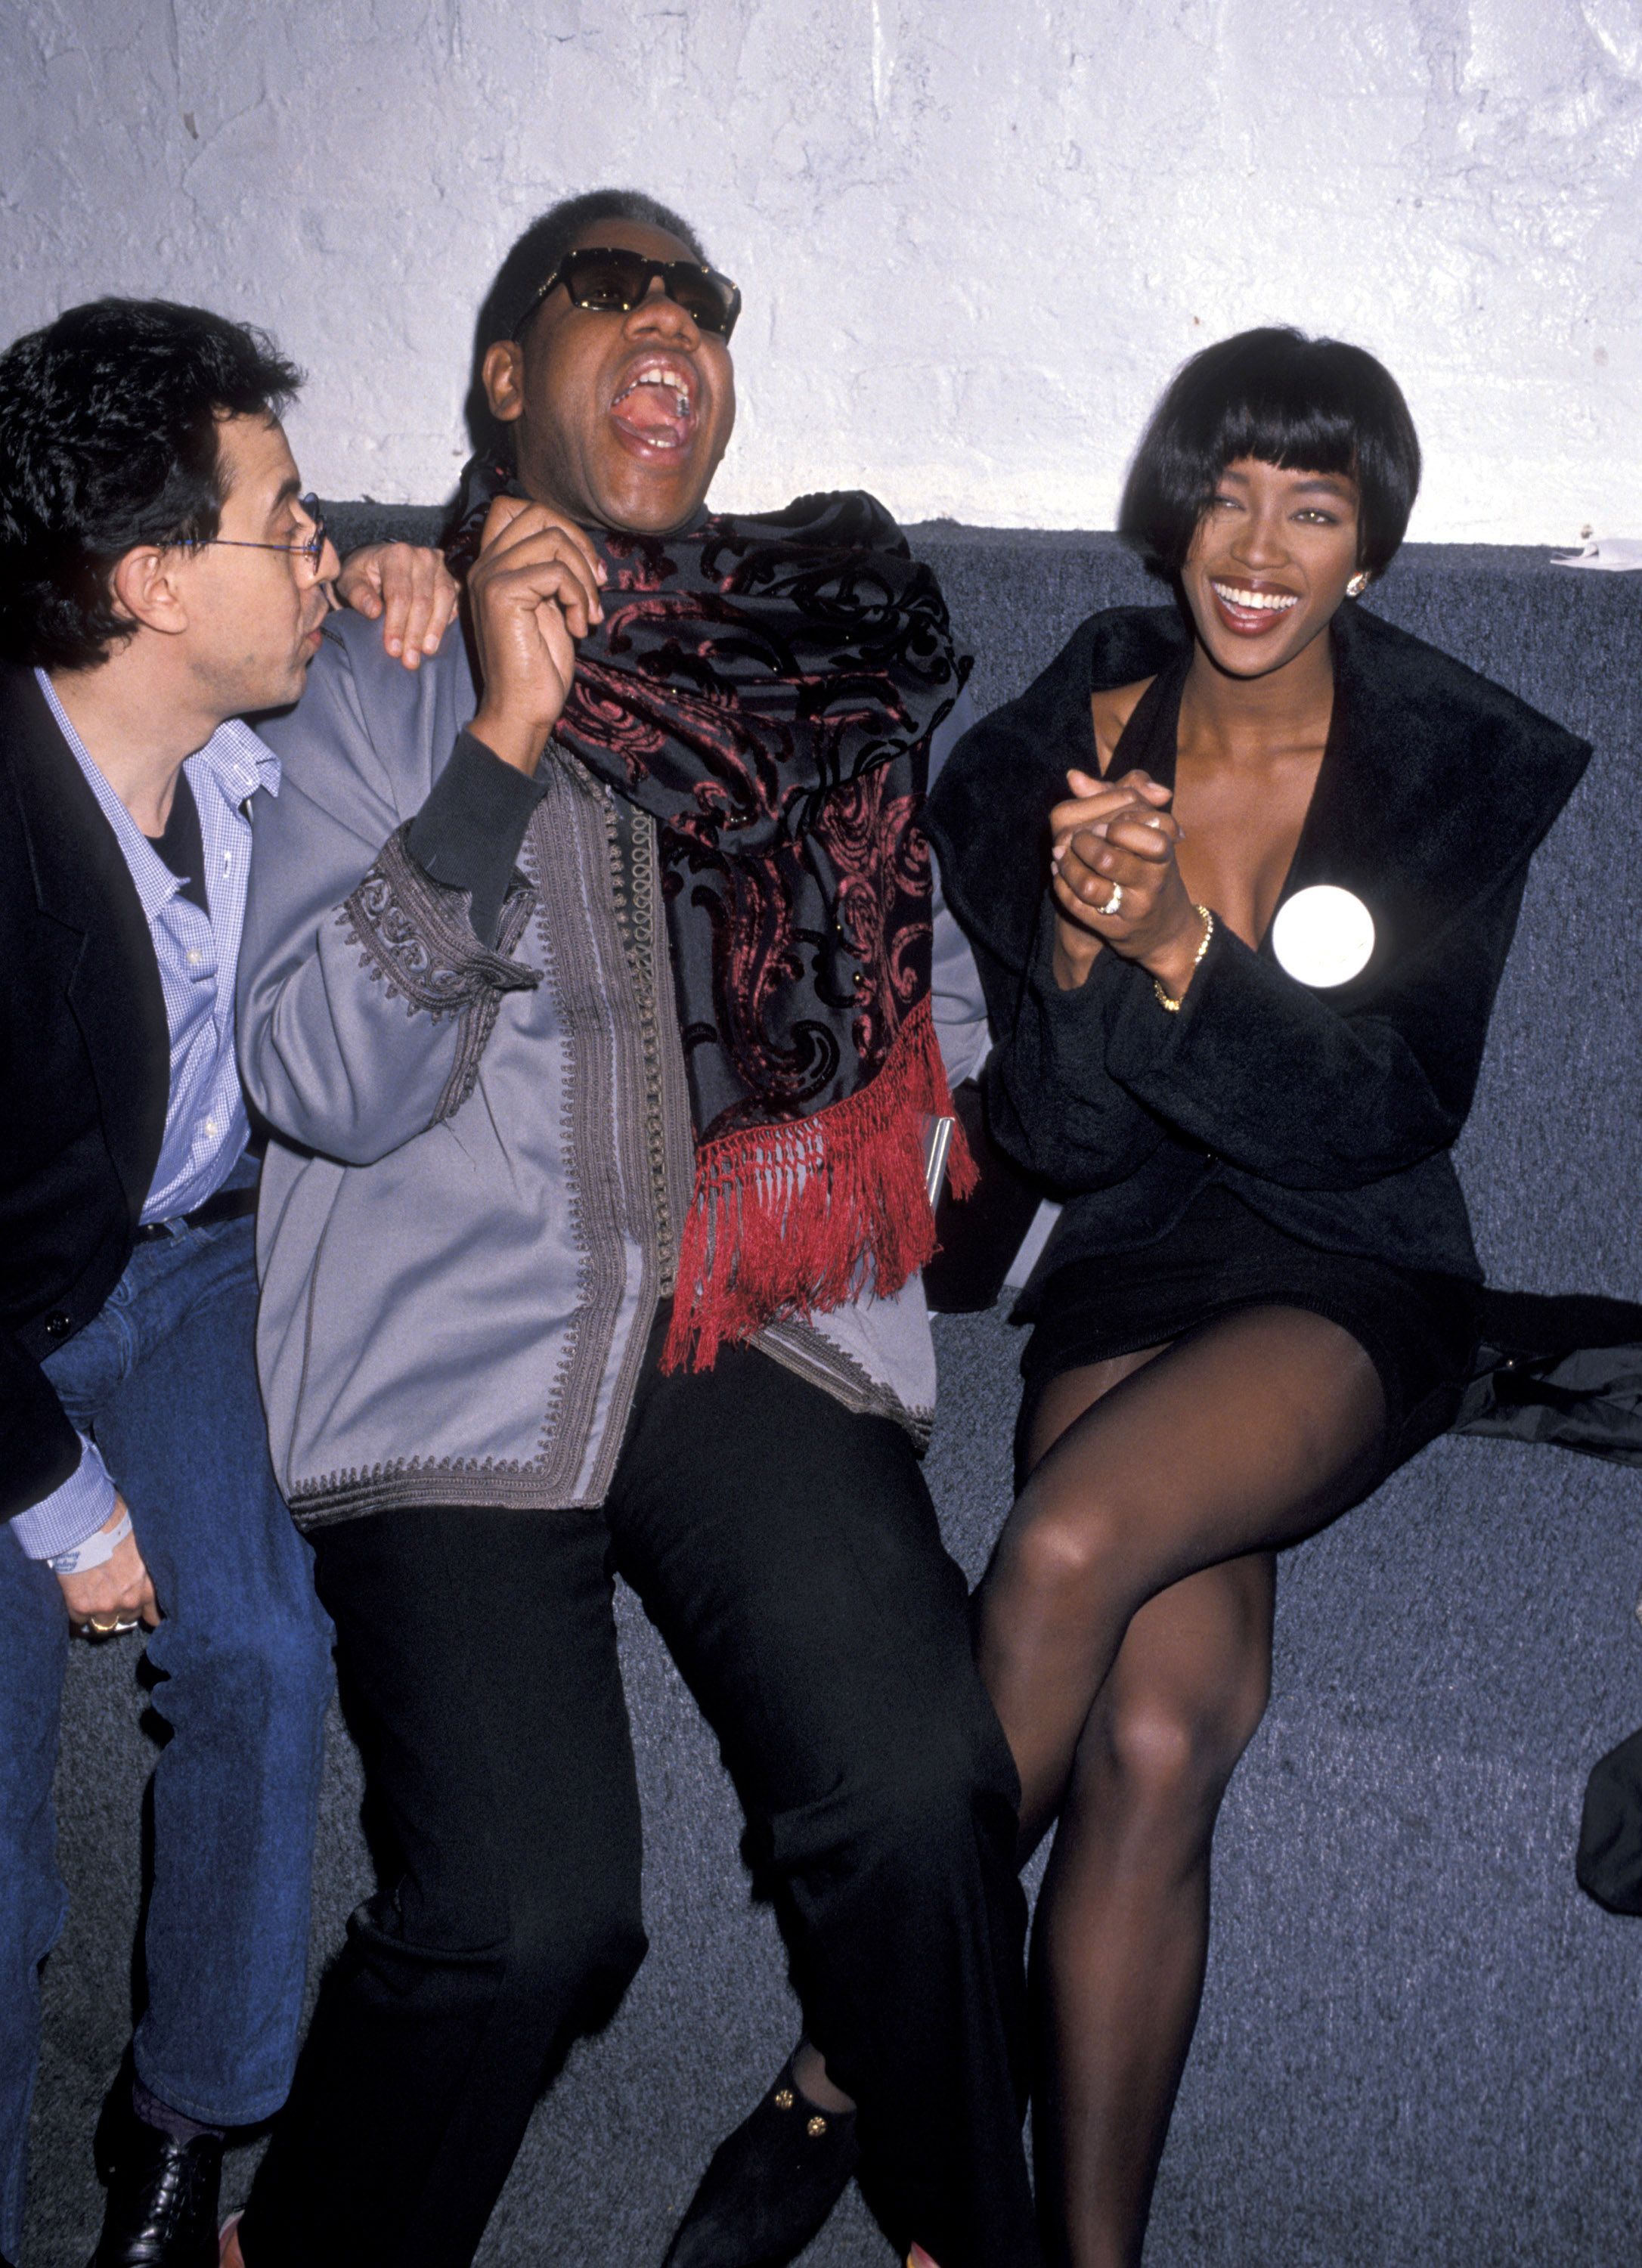 André Leon Talley: Music's Larger-Than-Life Fashion Maven